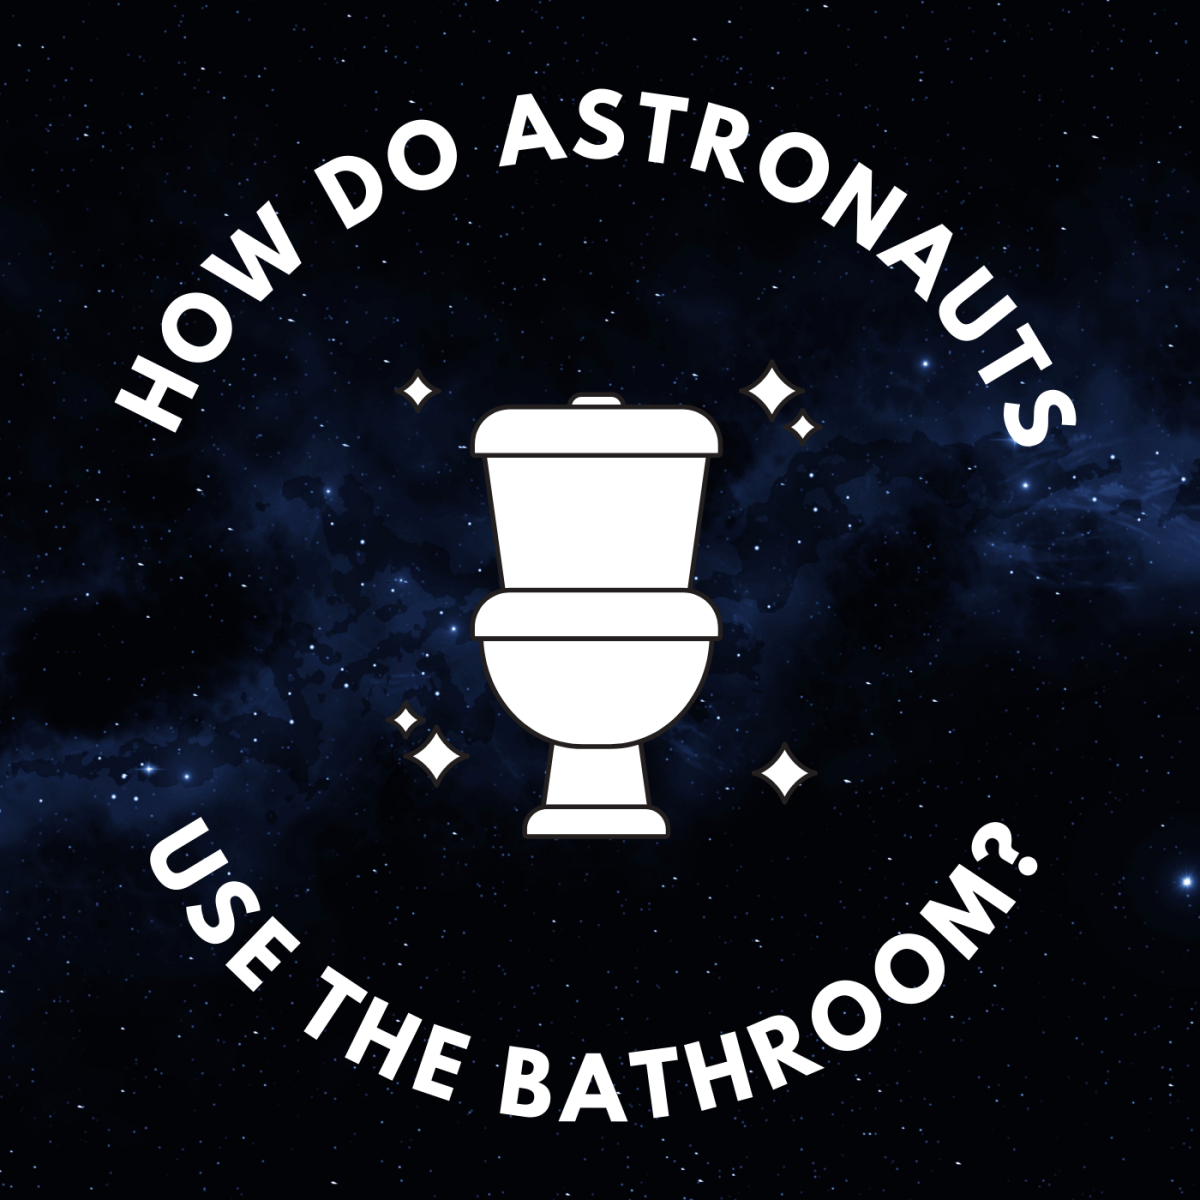 How do astronauts use the bathroom in space?